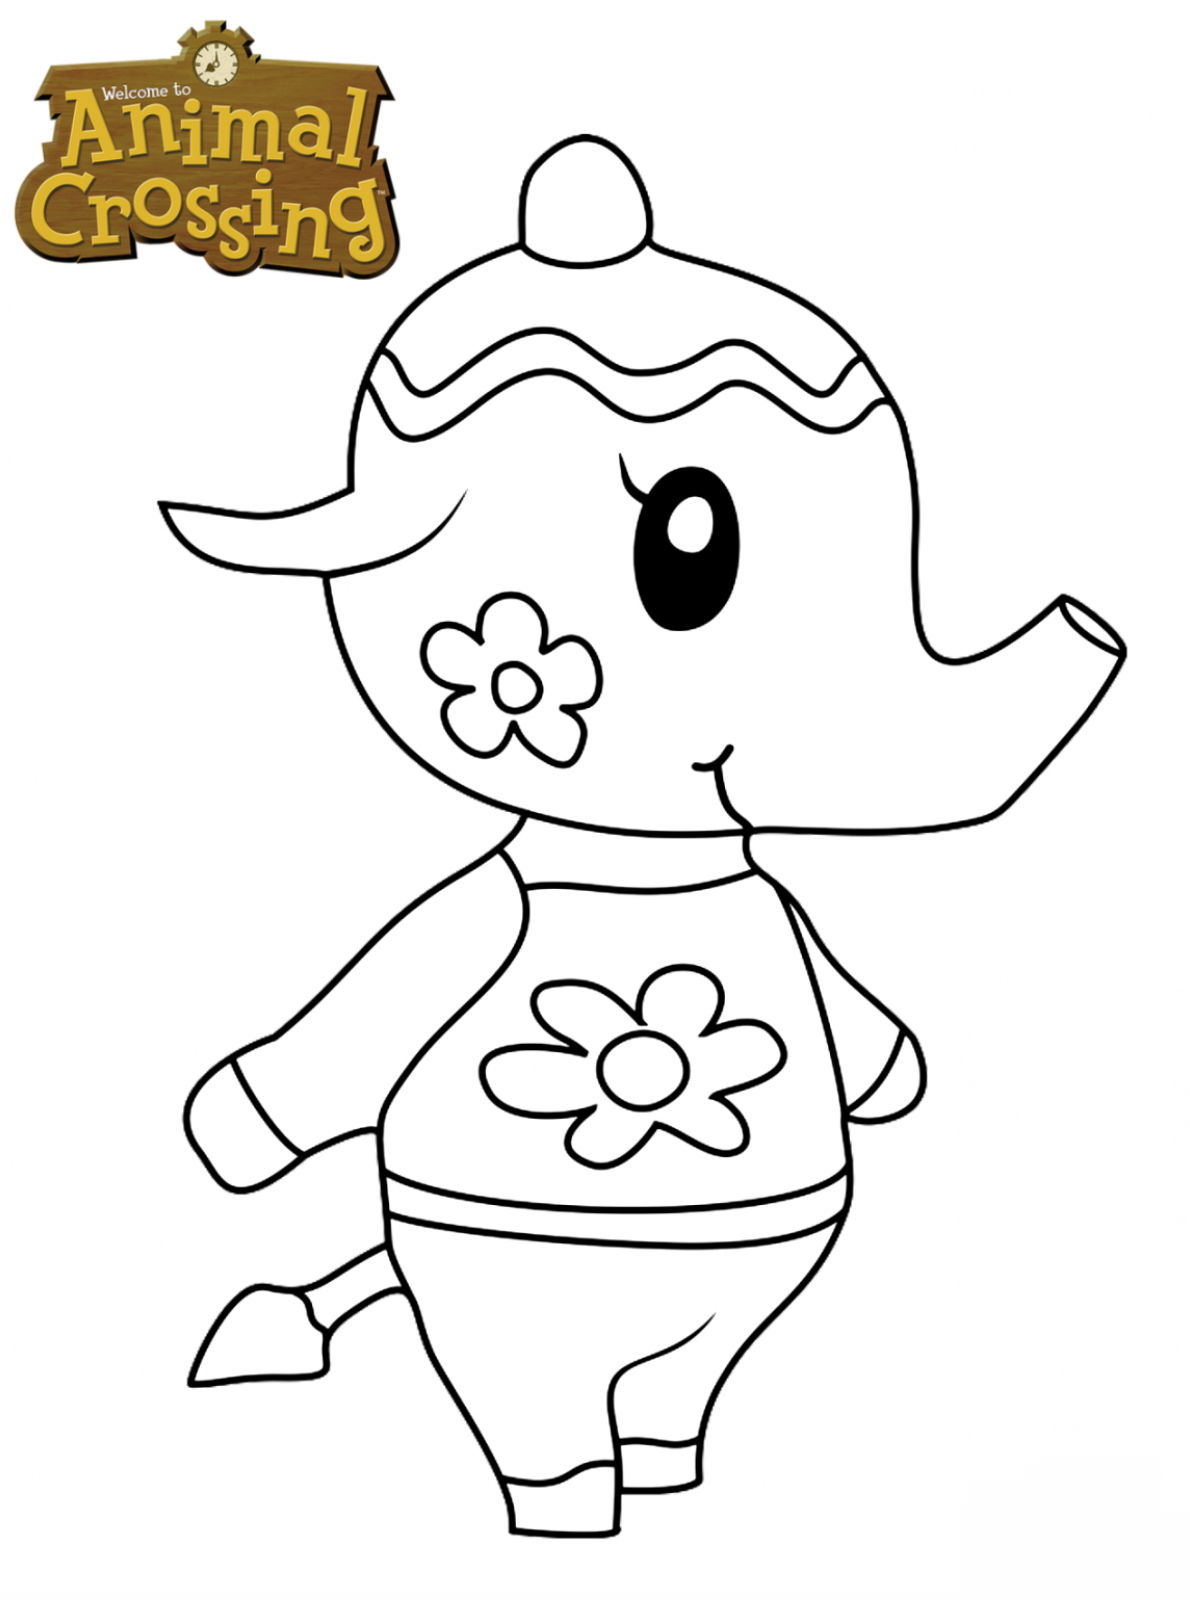 Tia Animal Crossing Coloring Pages